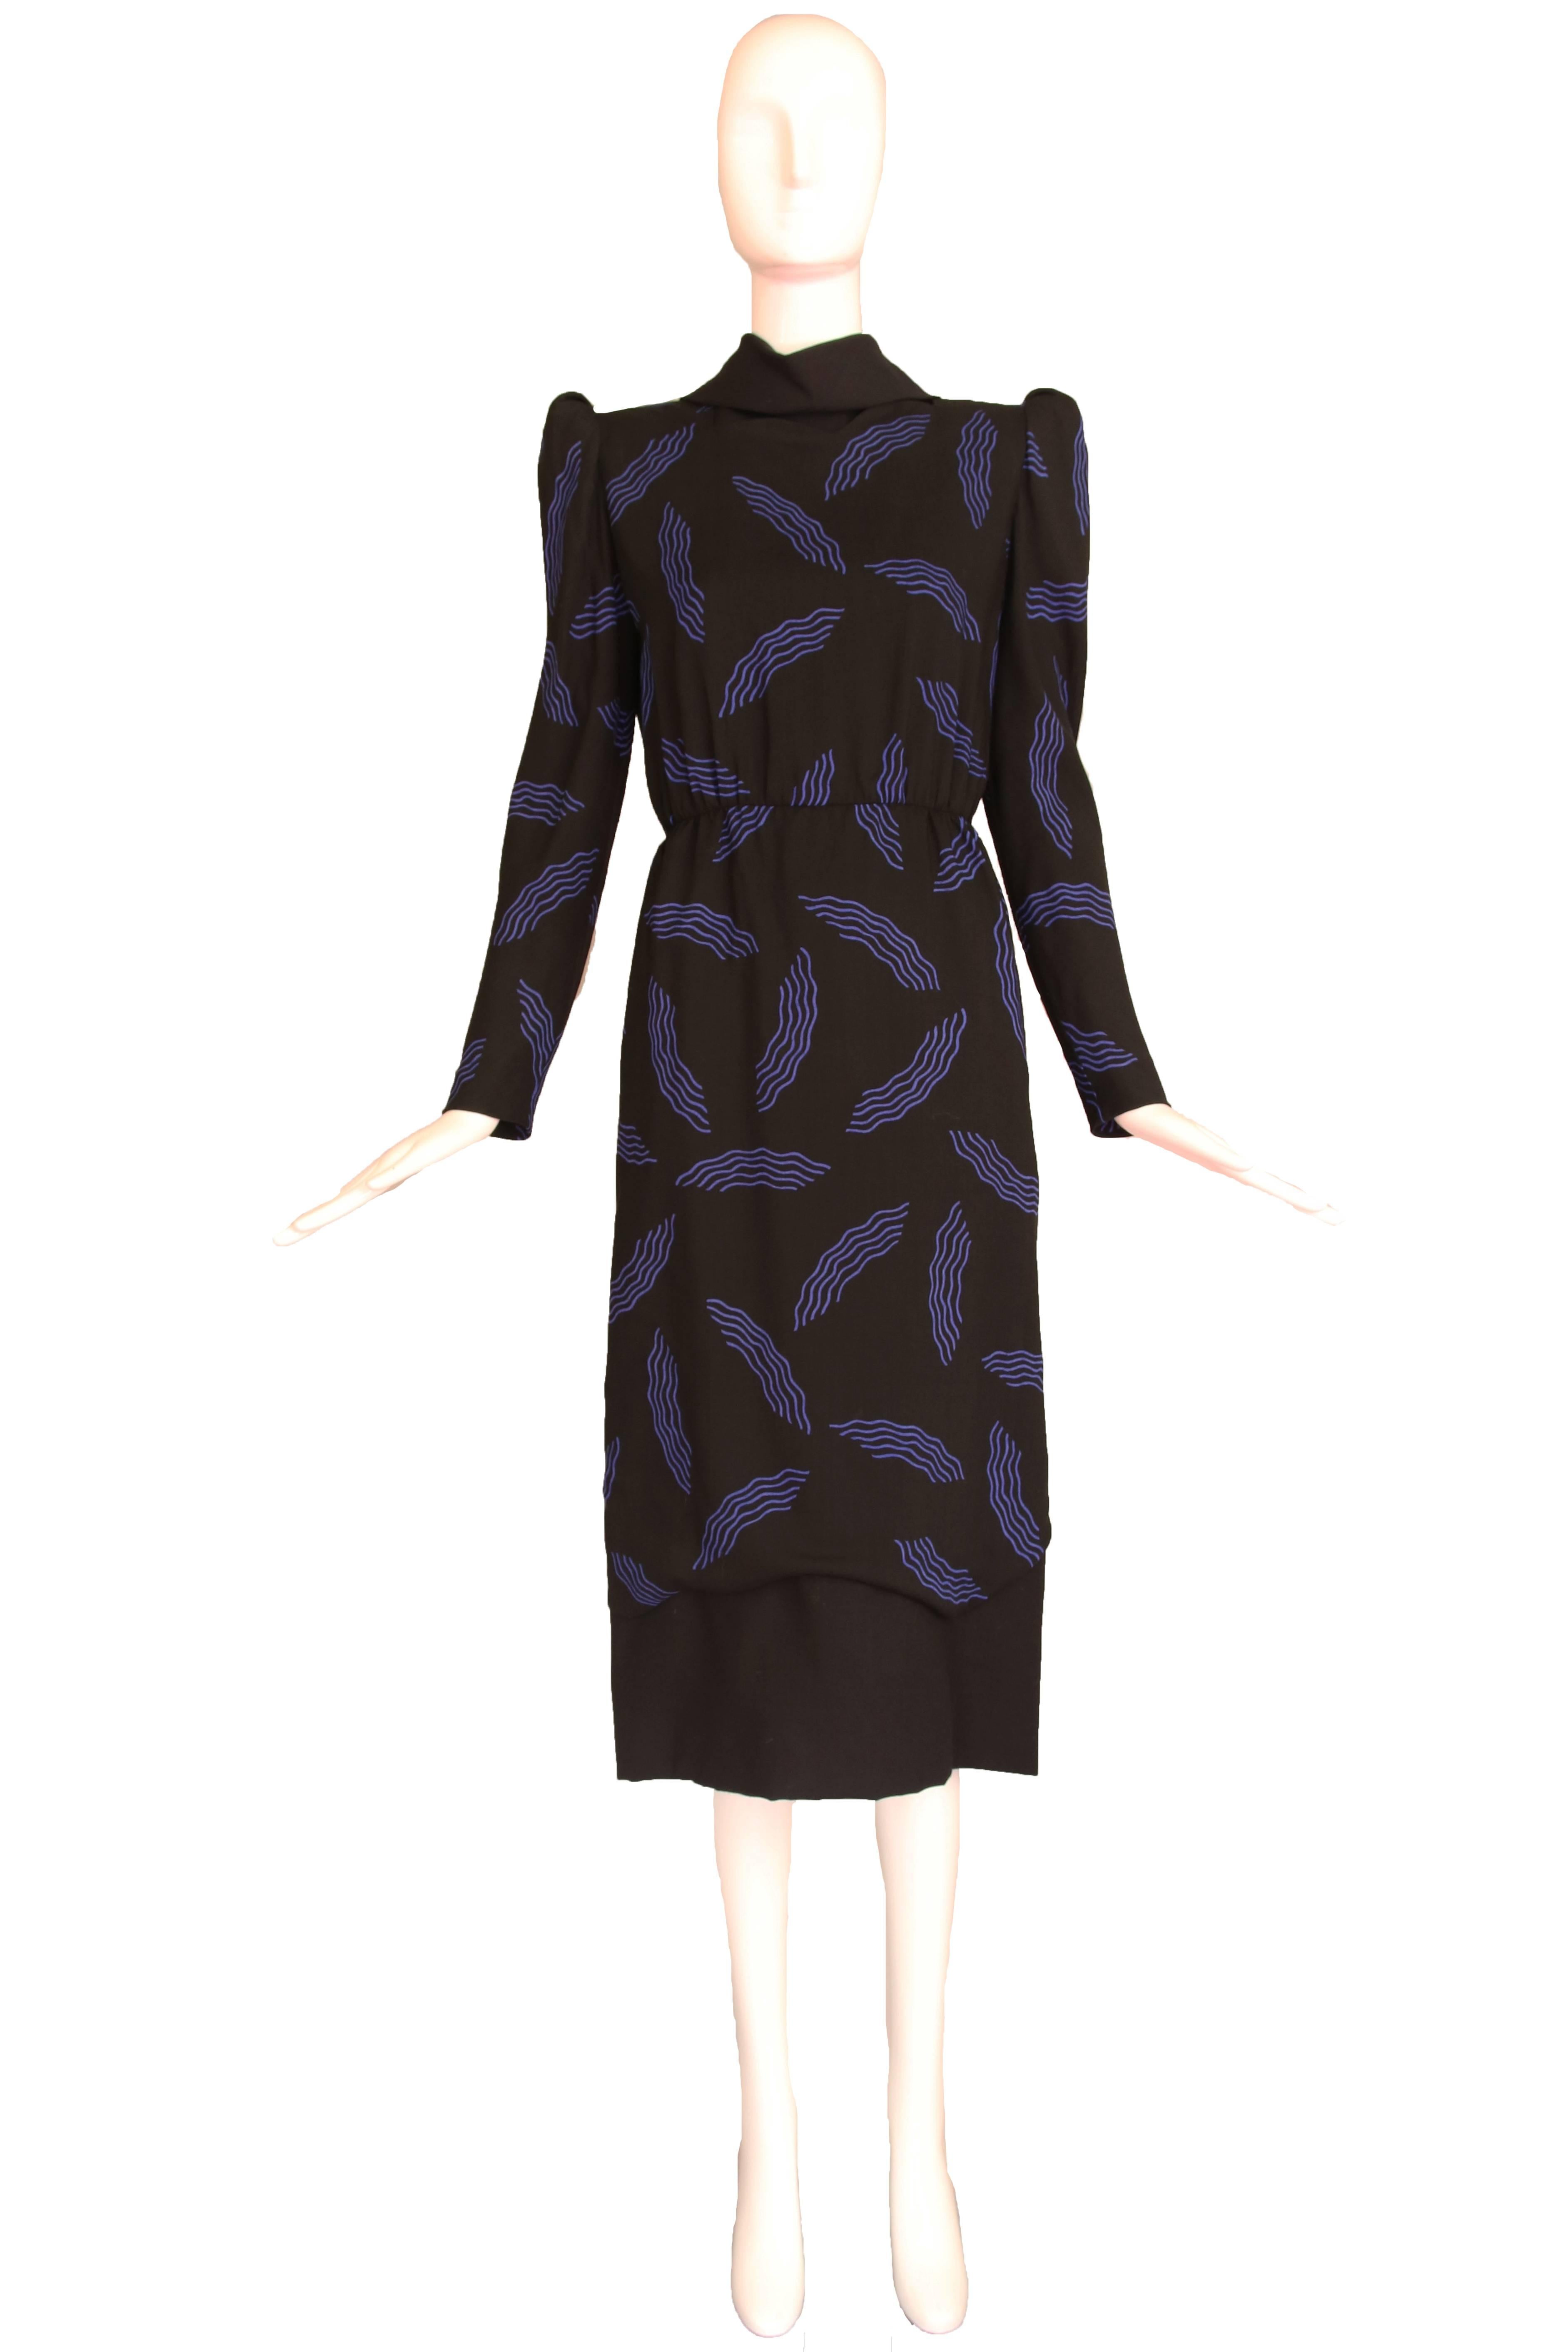 1980's Carolina Herrera black wool dress w/blue squiggle print and architectural design elements. Size 6. In excellent condition.
MEASUREMENTS:
Bust - 36